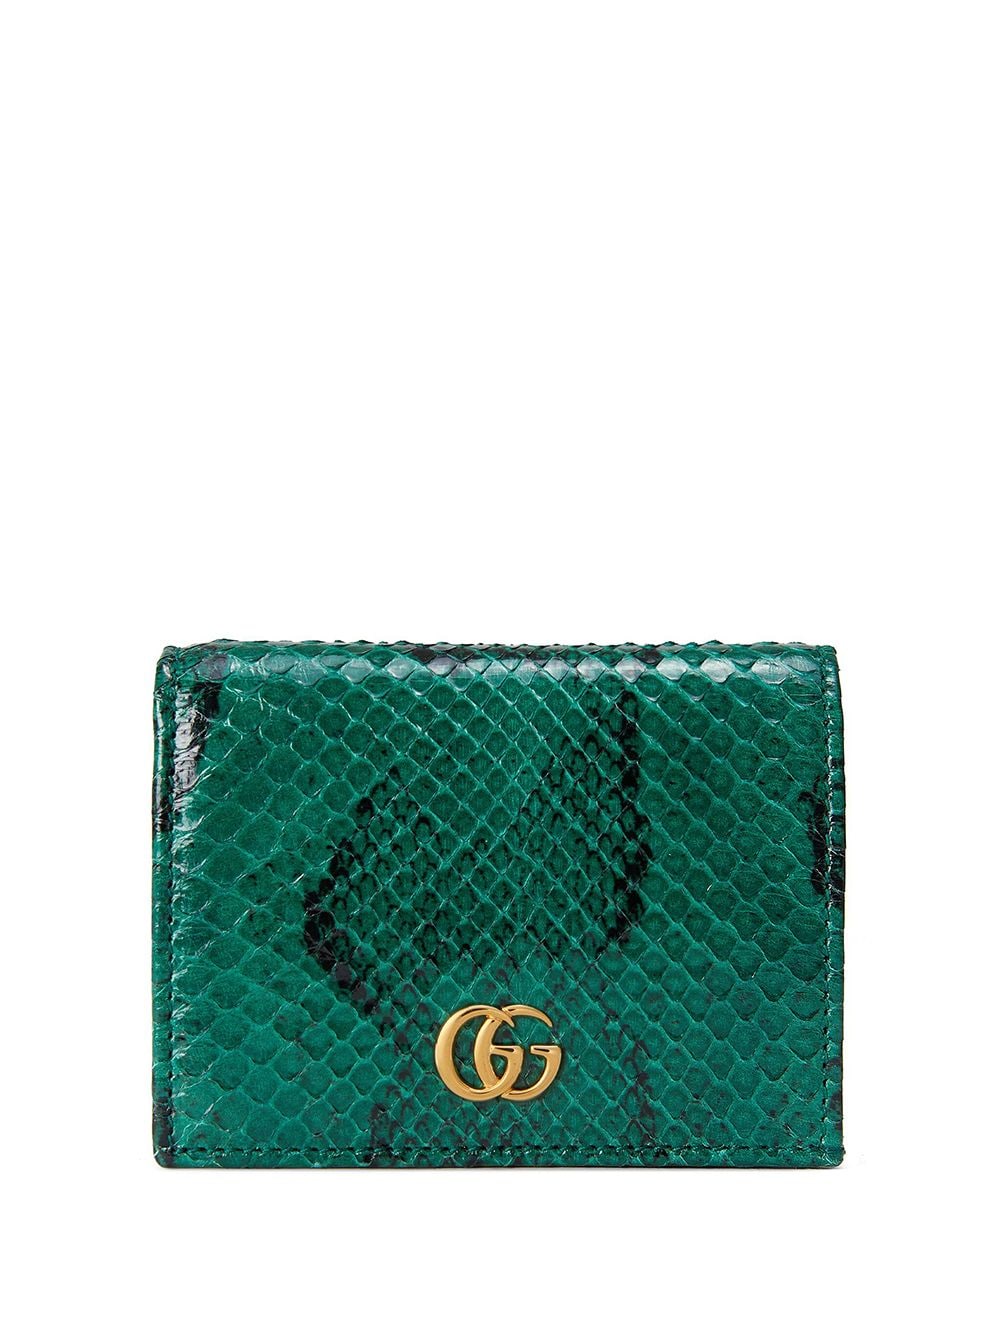 Gucci Gg Marmont Python-effect Wallet In Green